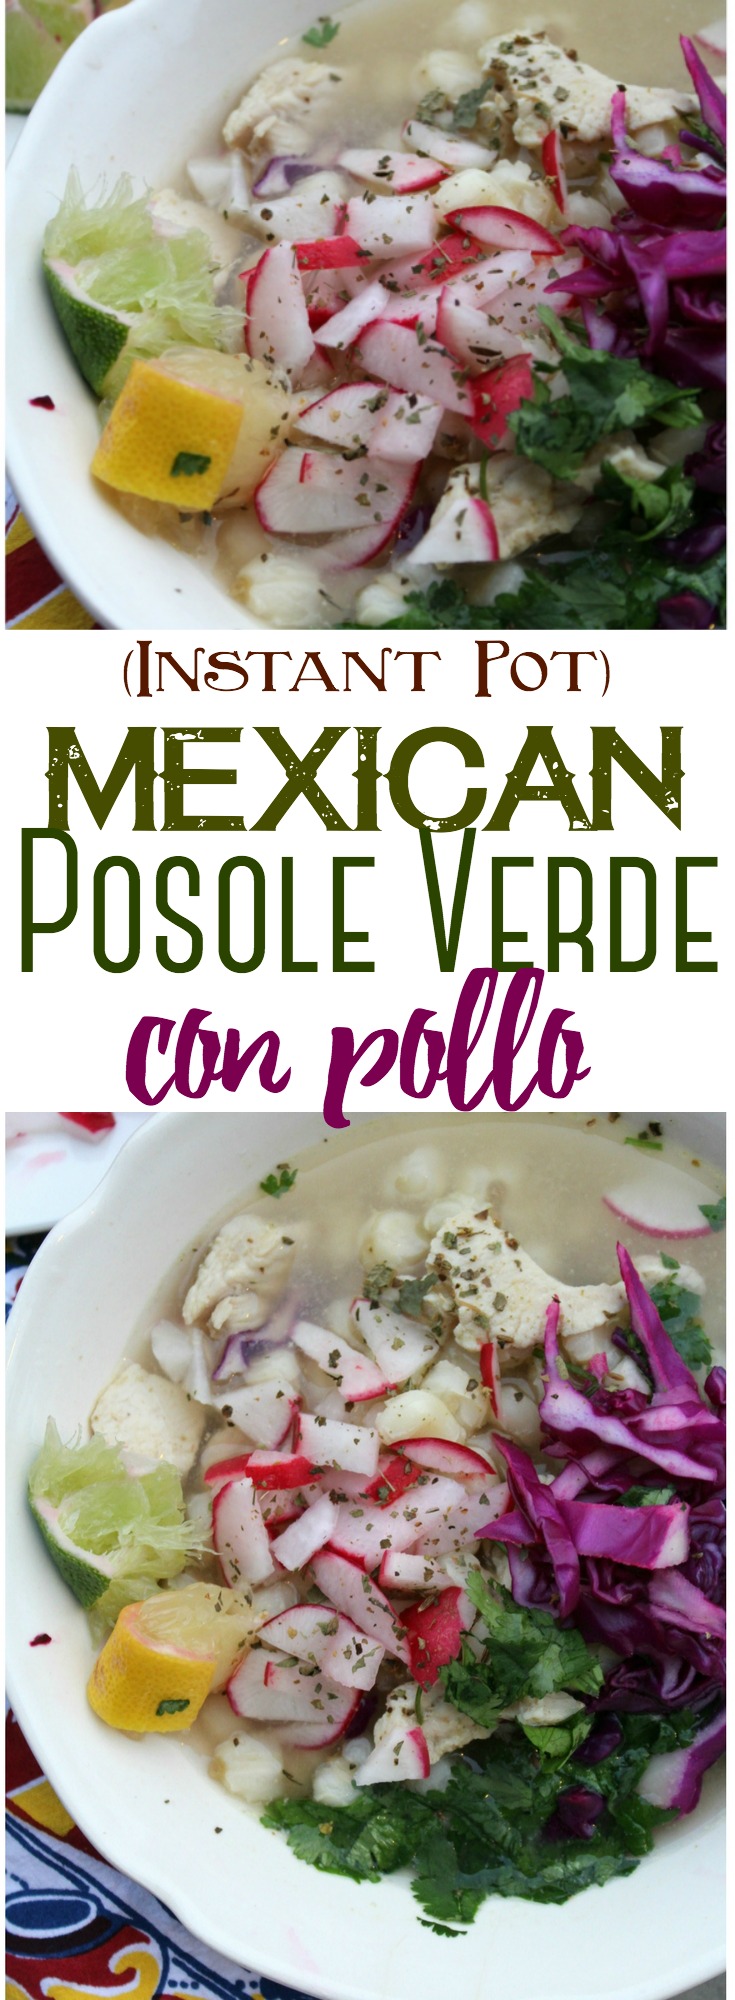 Traditional Mexican posole verde made with Hatch green chiles and chicken - easily made in the Instant Pot!  #Mexican #PosoleVerde #Pozole #HatchGreenChiles #Hatch #GreenChile #Soup #Stew #InstantPot #PressureCooker